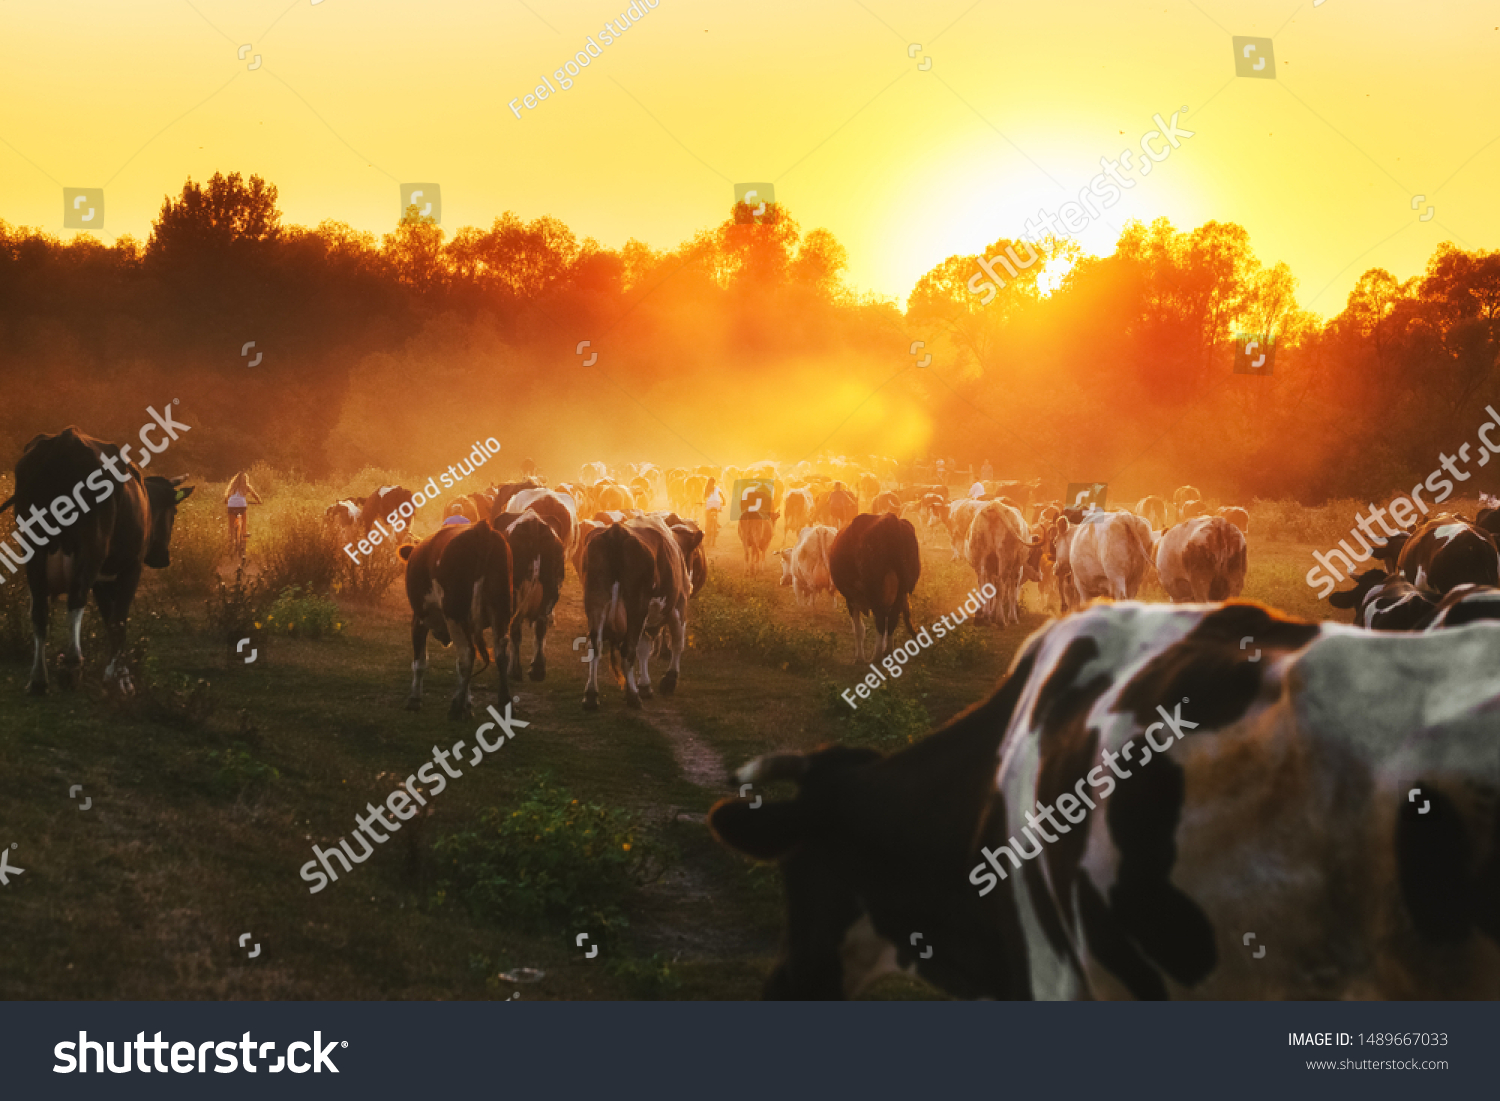 Epic scene of cattle farm - livestock of cows going home from meadows pasture in evening. Amazing sunset scenery. Countryside background. Dairy natural bio production. #1489667033